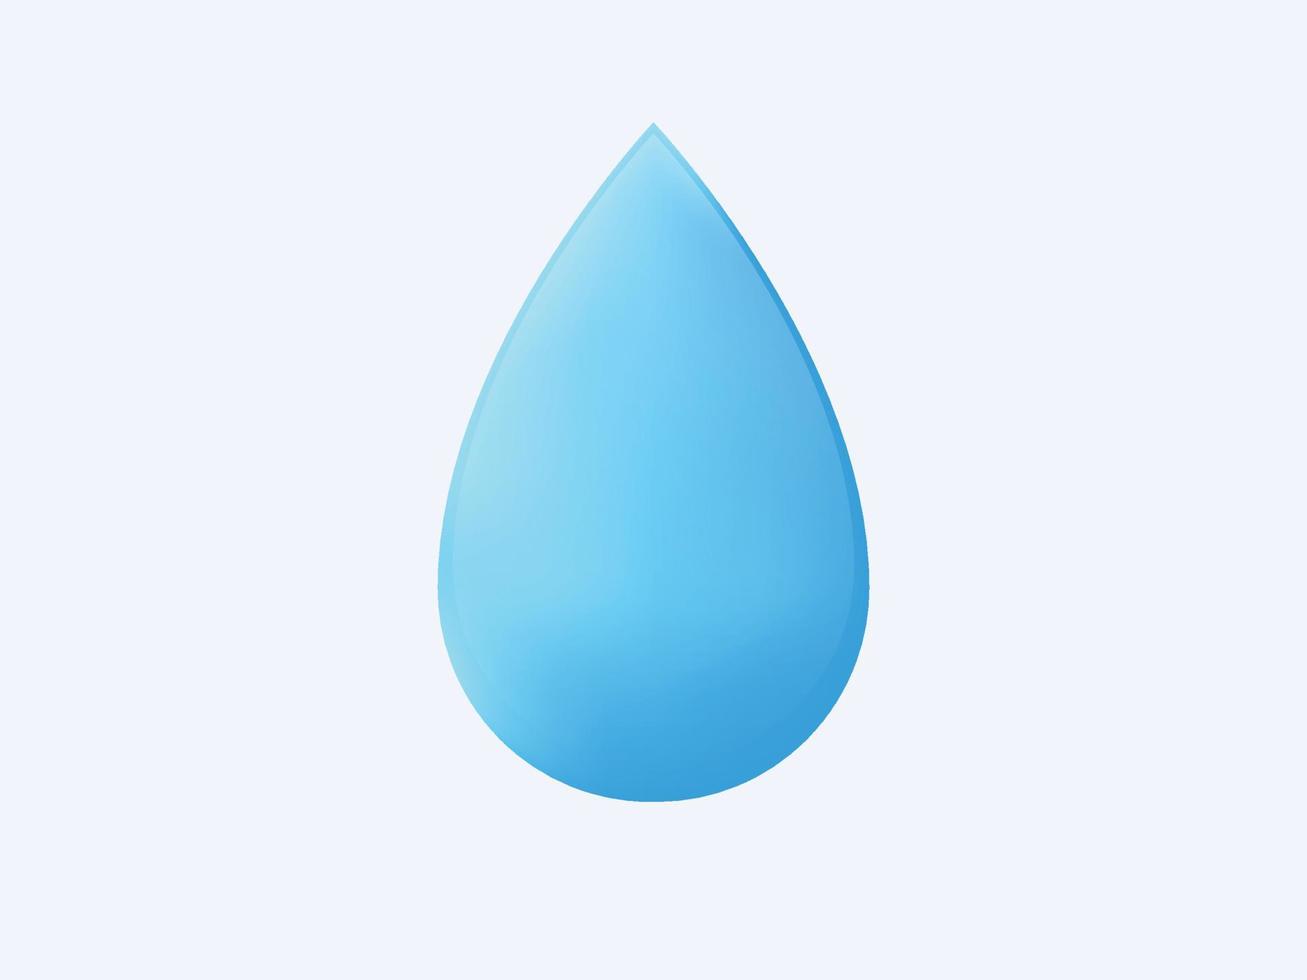 3d water drop isolated. Pure blue liquid teardrop shape transparent freshness close up geometric shape of mineral eco environment reflections with dripping cool vector symbol.